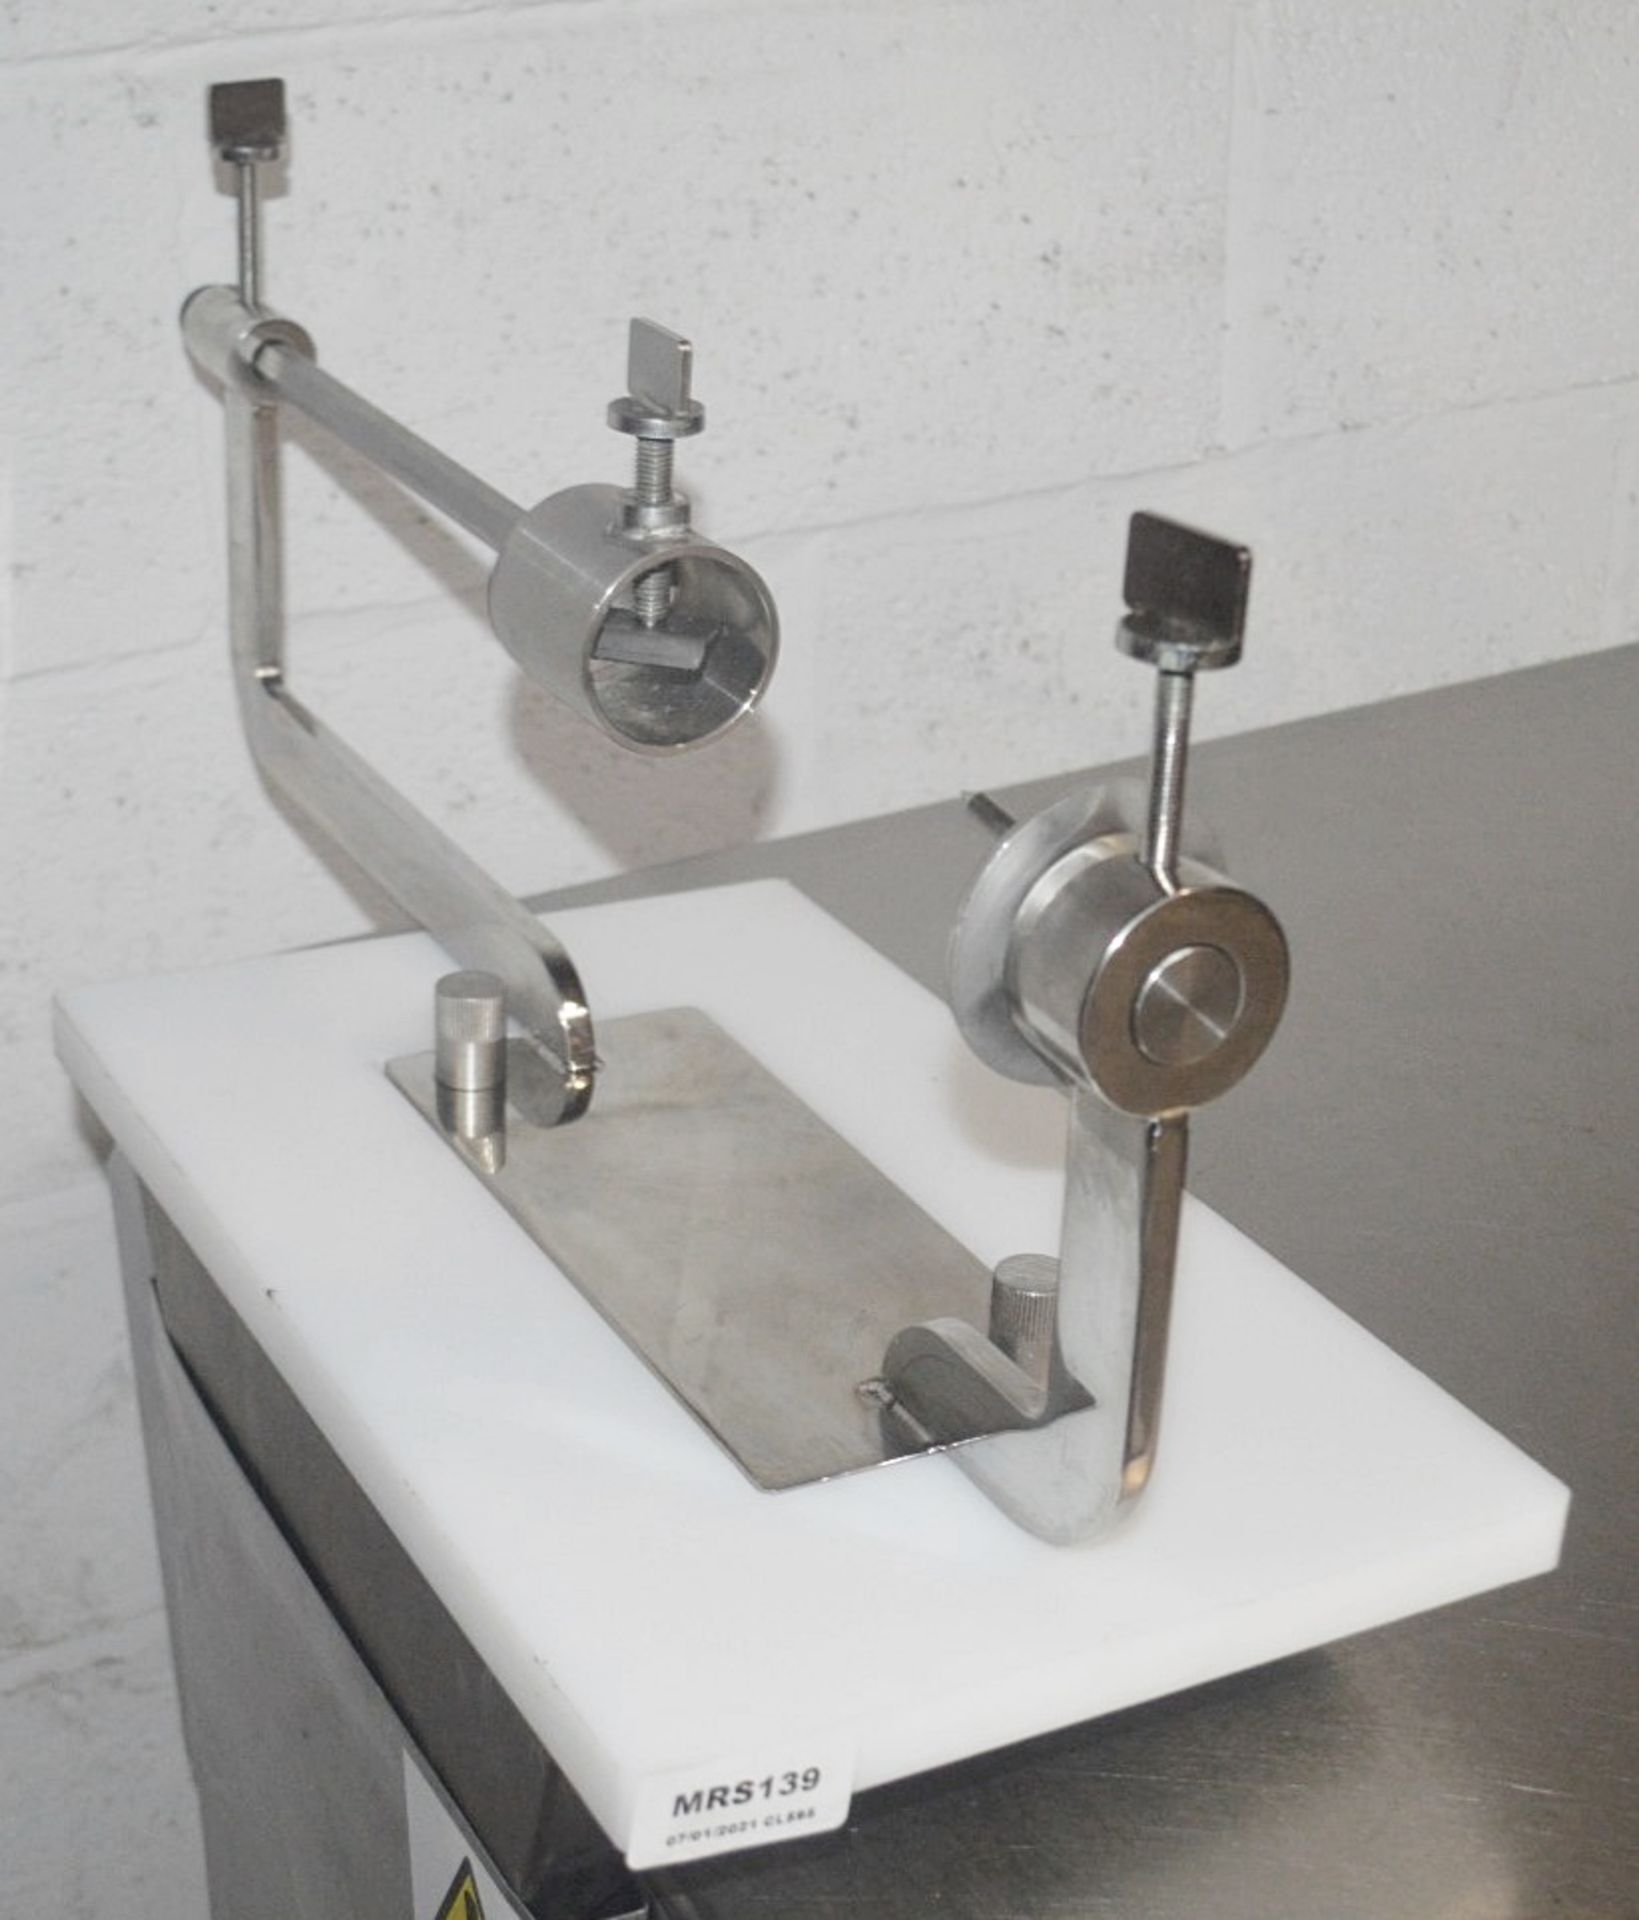 1 x Stainless Steel Commercial Kitchen Meat Vice - Dimensions: H29 x W62 x D25cm - Very Recently